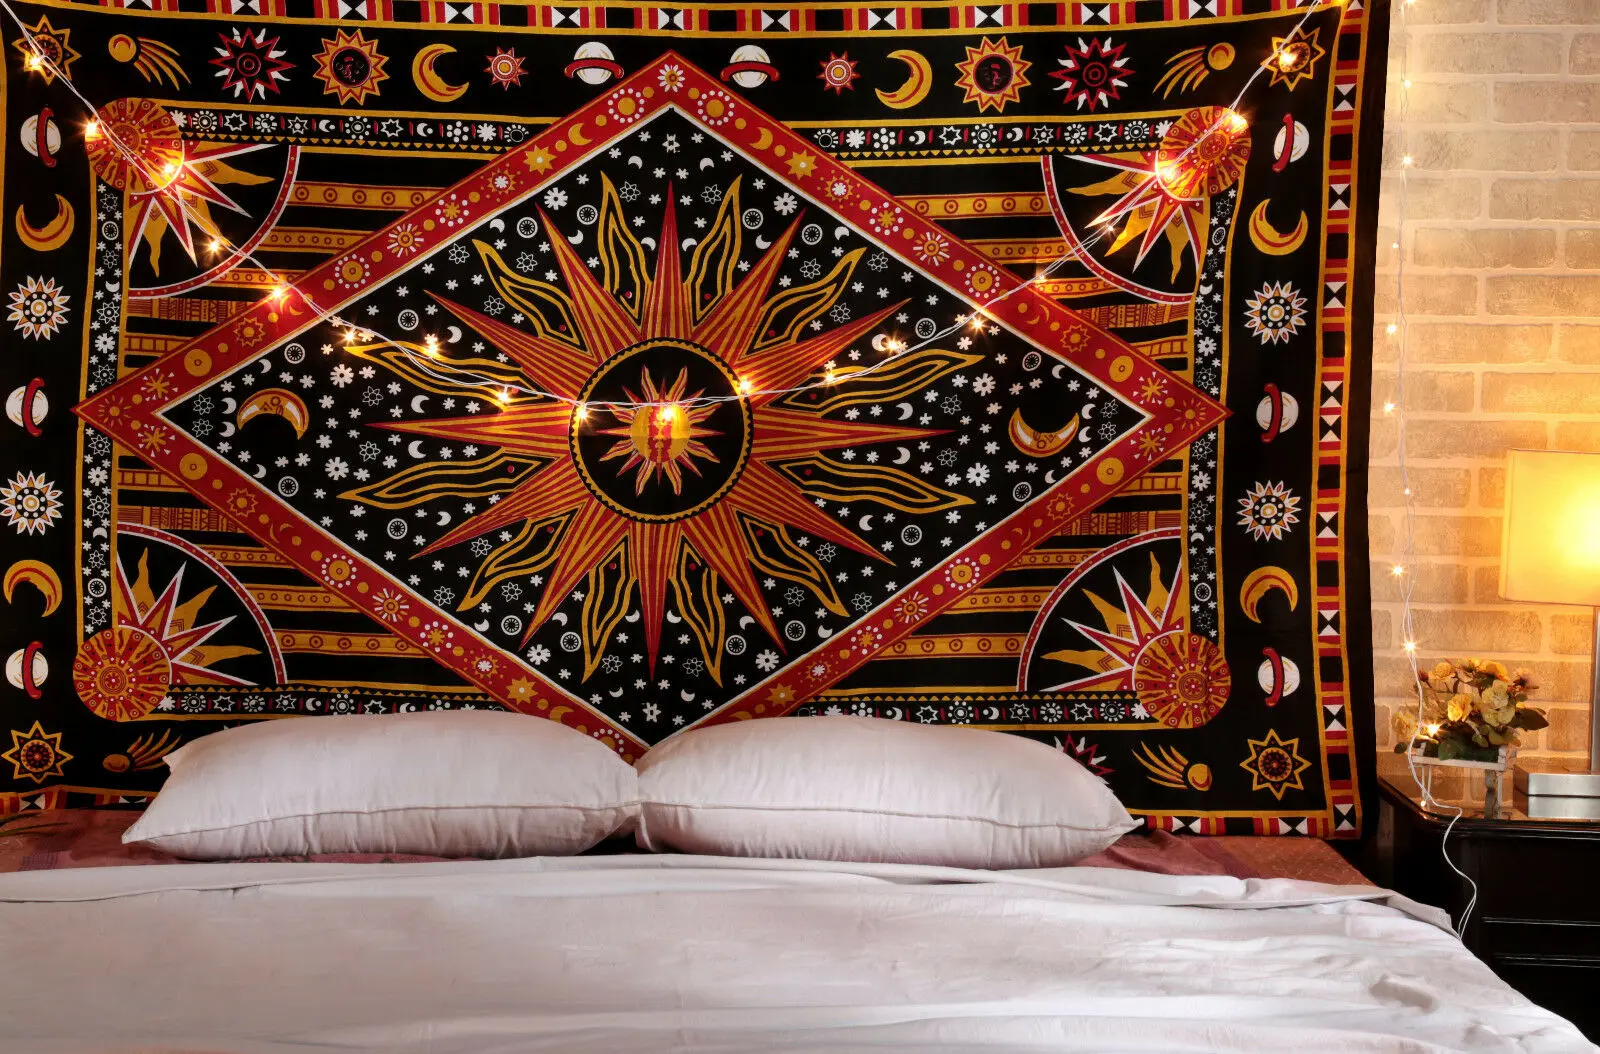 

2019 Vintage Sun Moon Stars Planet Tapestry Bohemian Indian Hippie Dorm Decor Wall Hanging